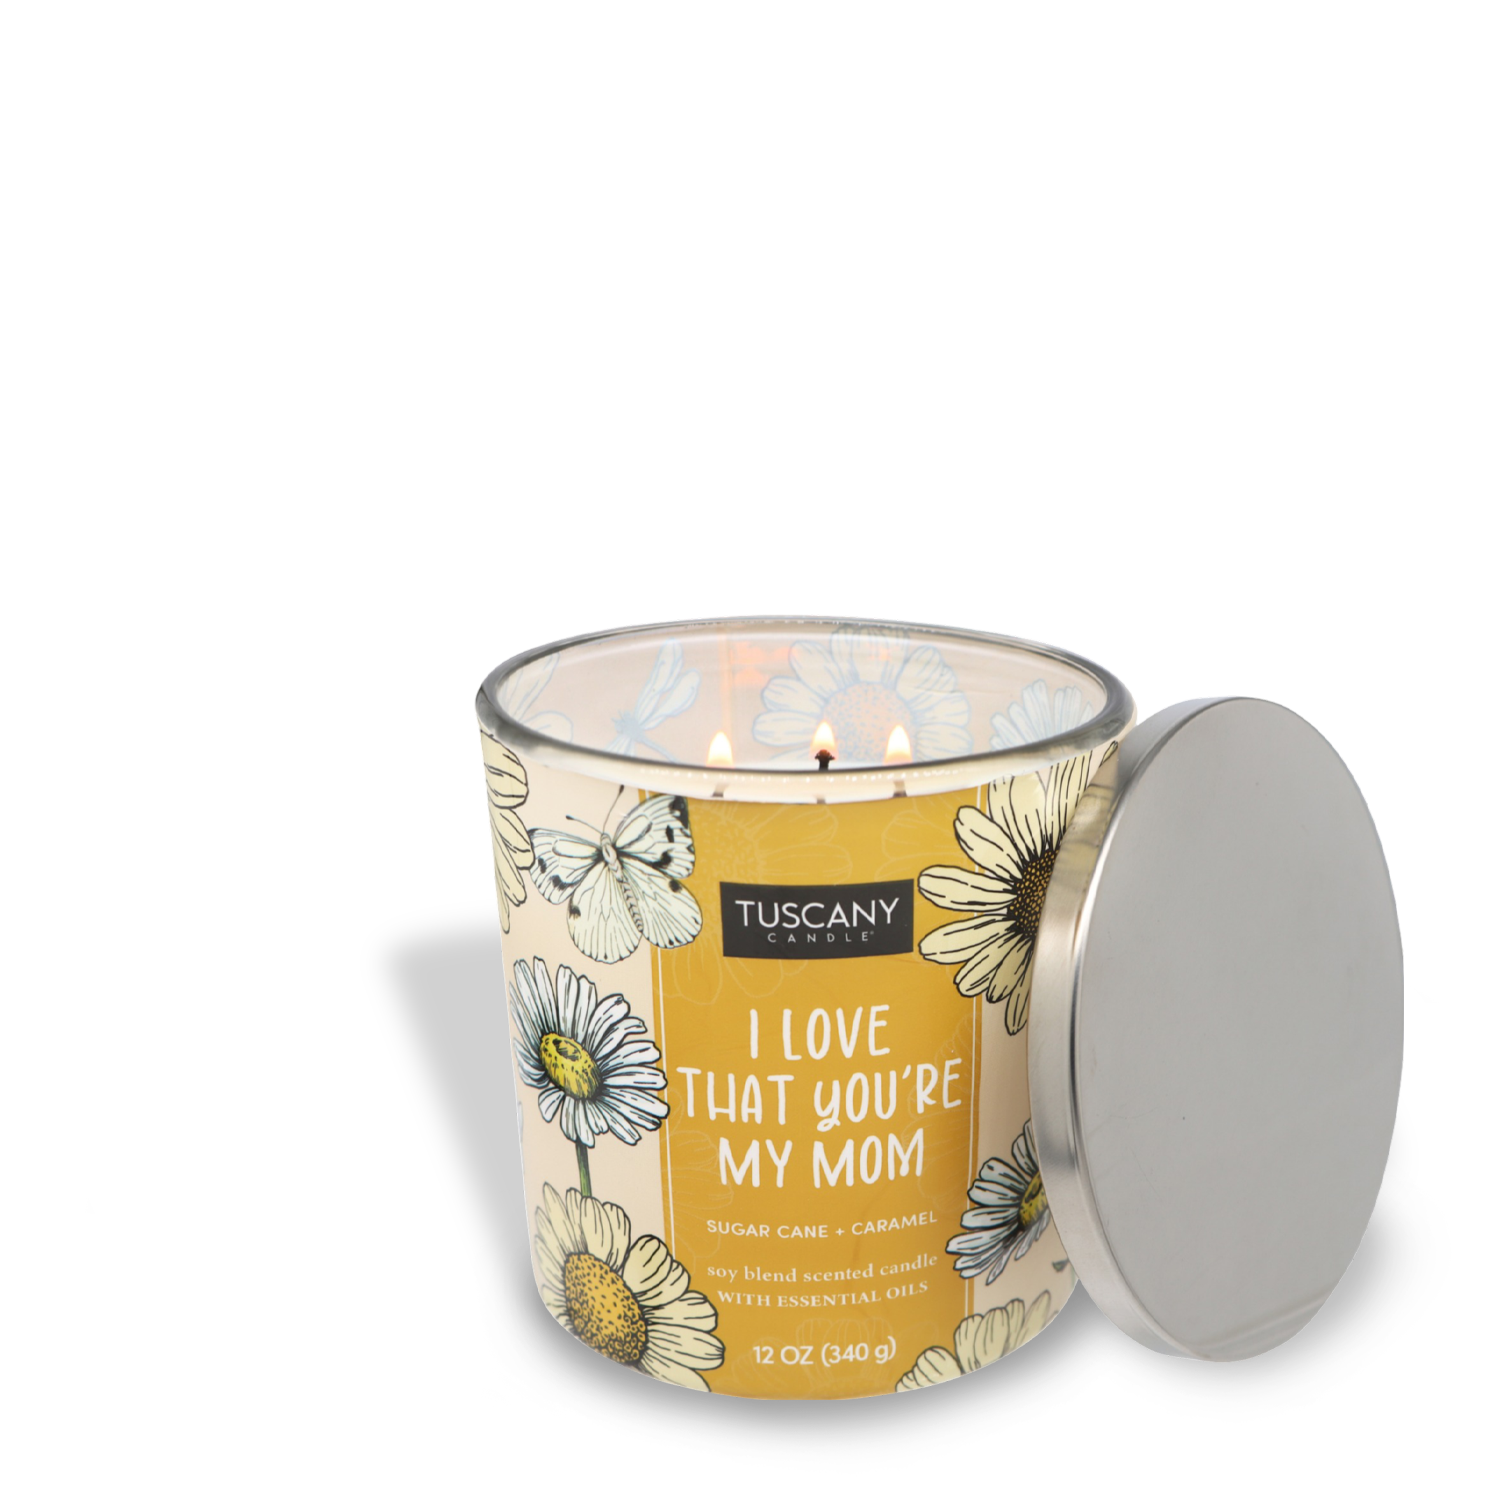 A Tuscany Candle® SEASONAL scented candle in a glass jar with floral designs and the message "i love that you're my mom" on it, accompanied by a silver lid.